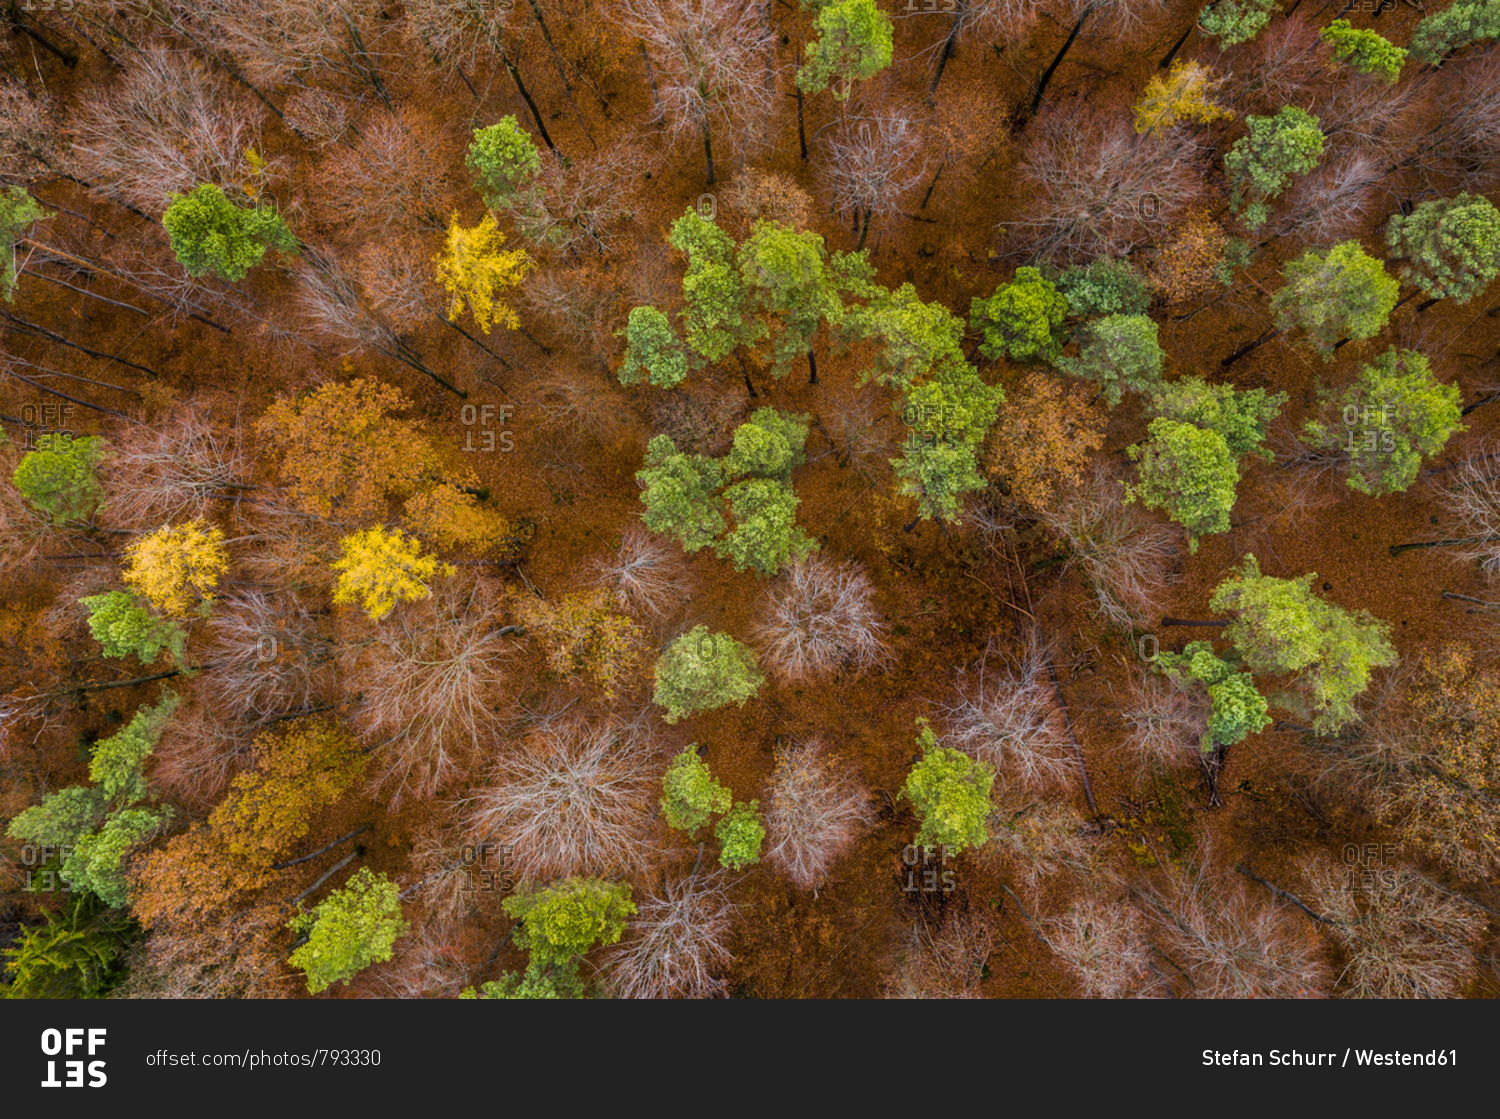 Germany- Baden-Wuerttemberg- Swabian Franconian forest- Aerial view of forest in autumn from above